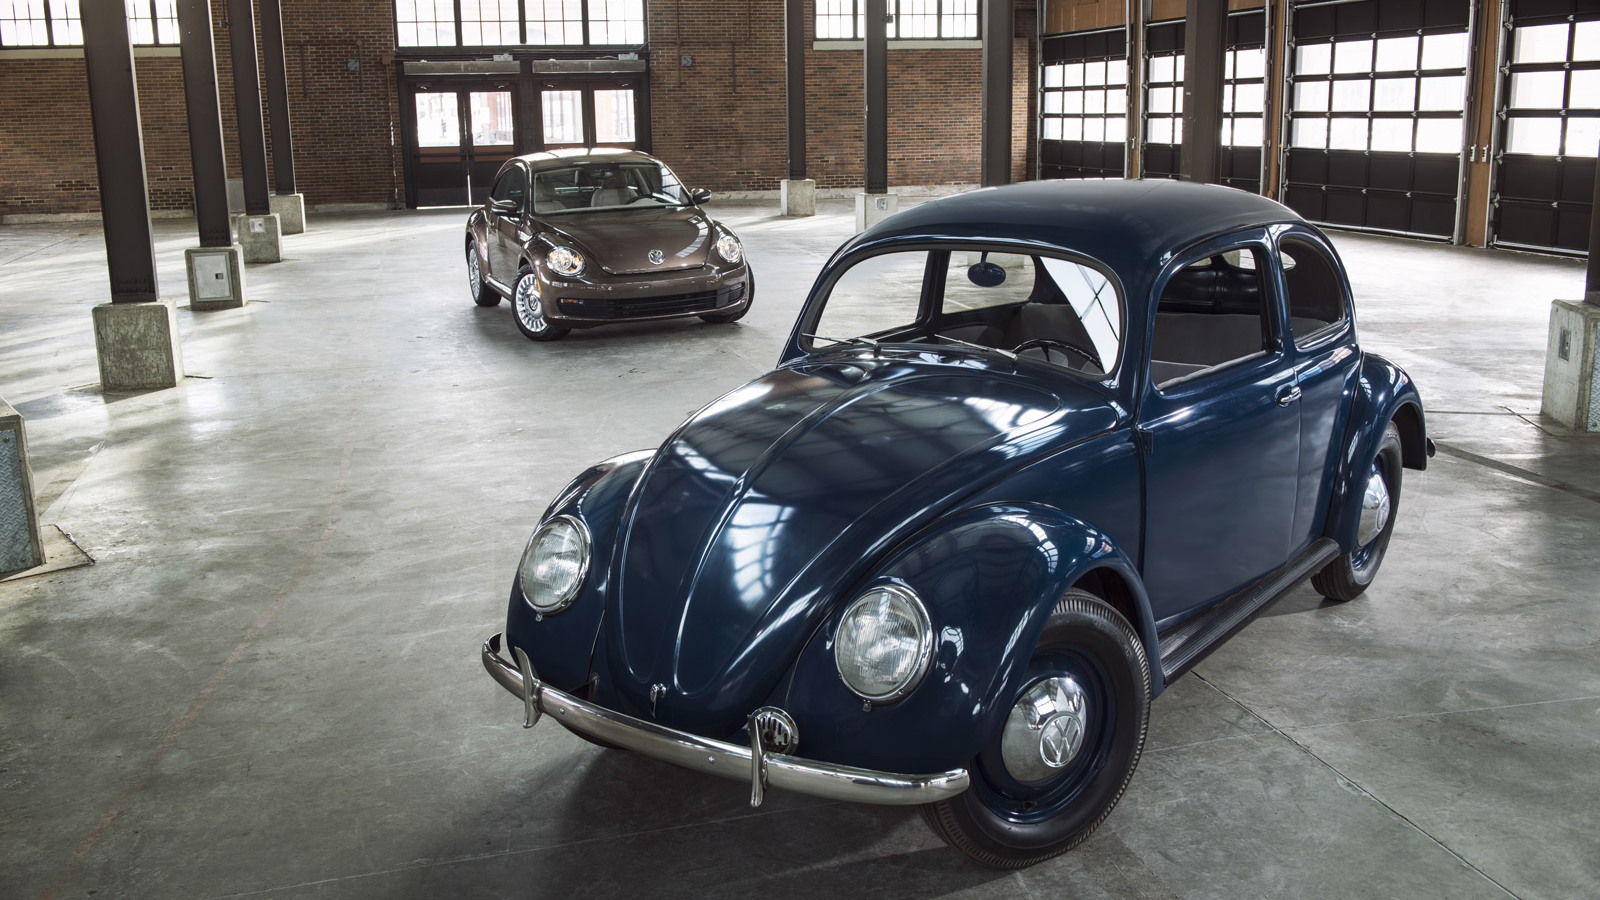 Volkswagen Beetle Celebrates Its 65th Year In The U.S.